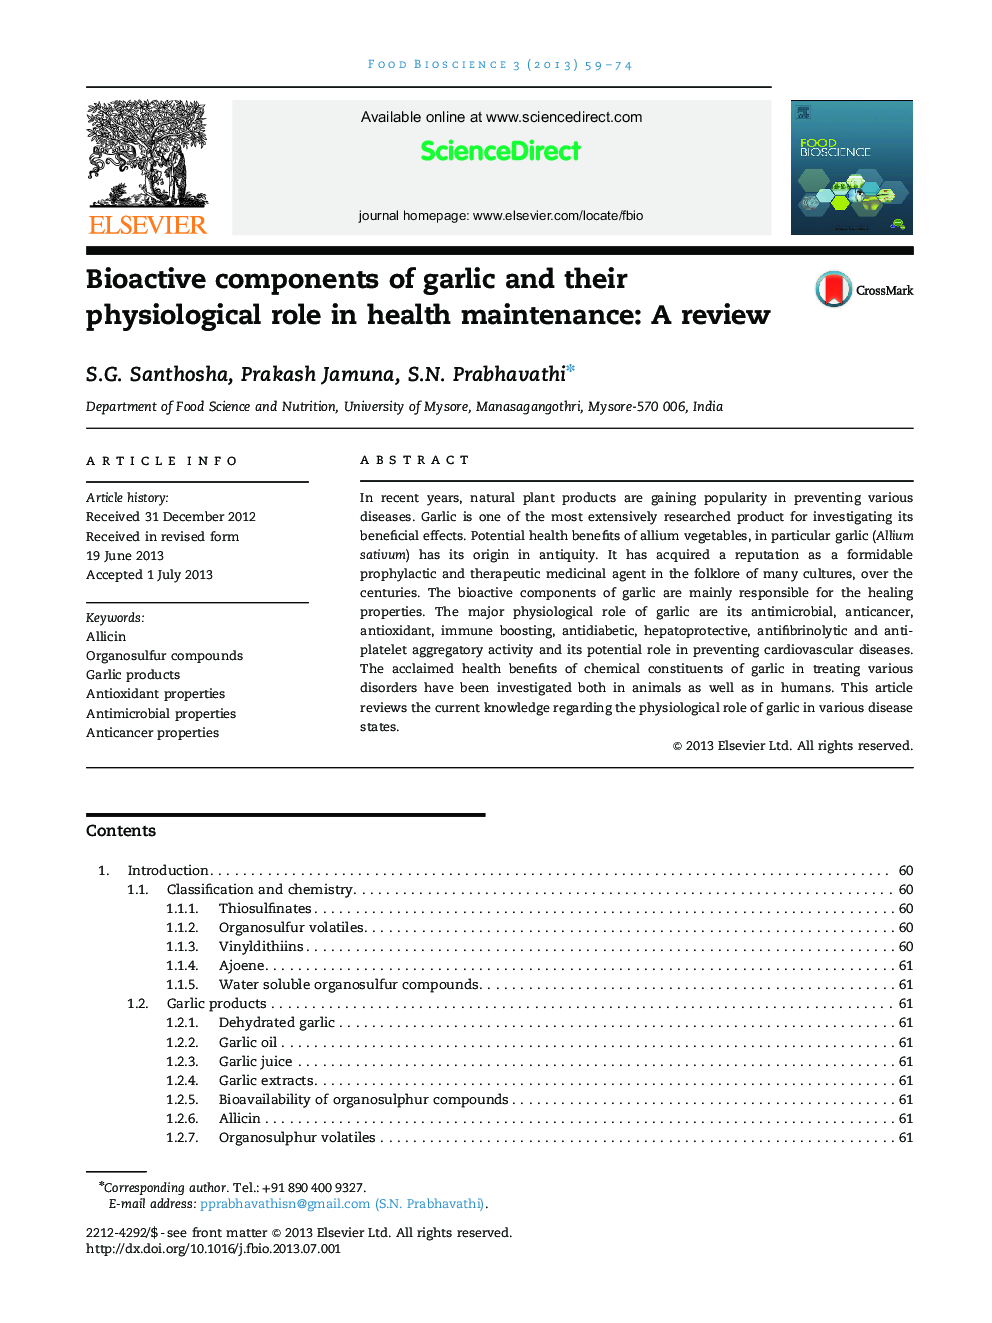 Bioactive components of garlic and their physiological role in health maintenance: A review